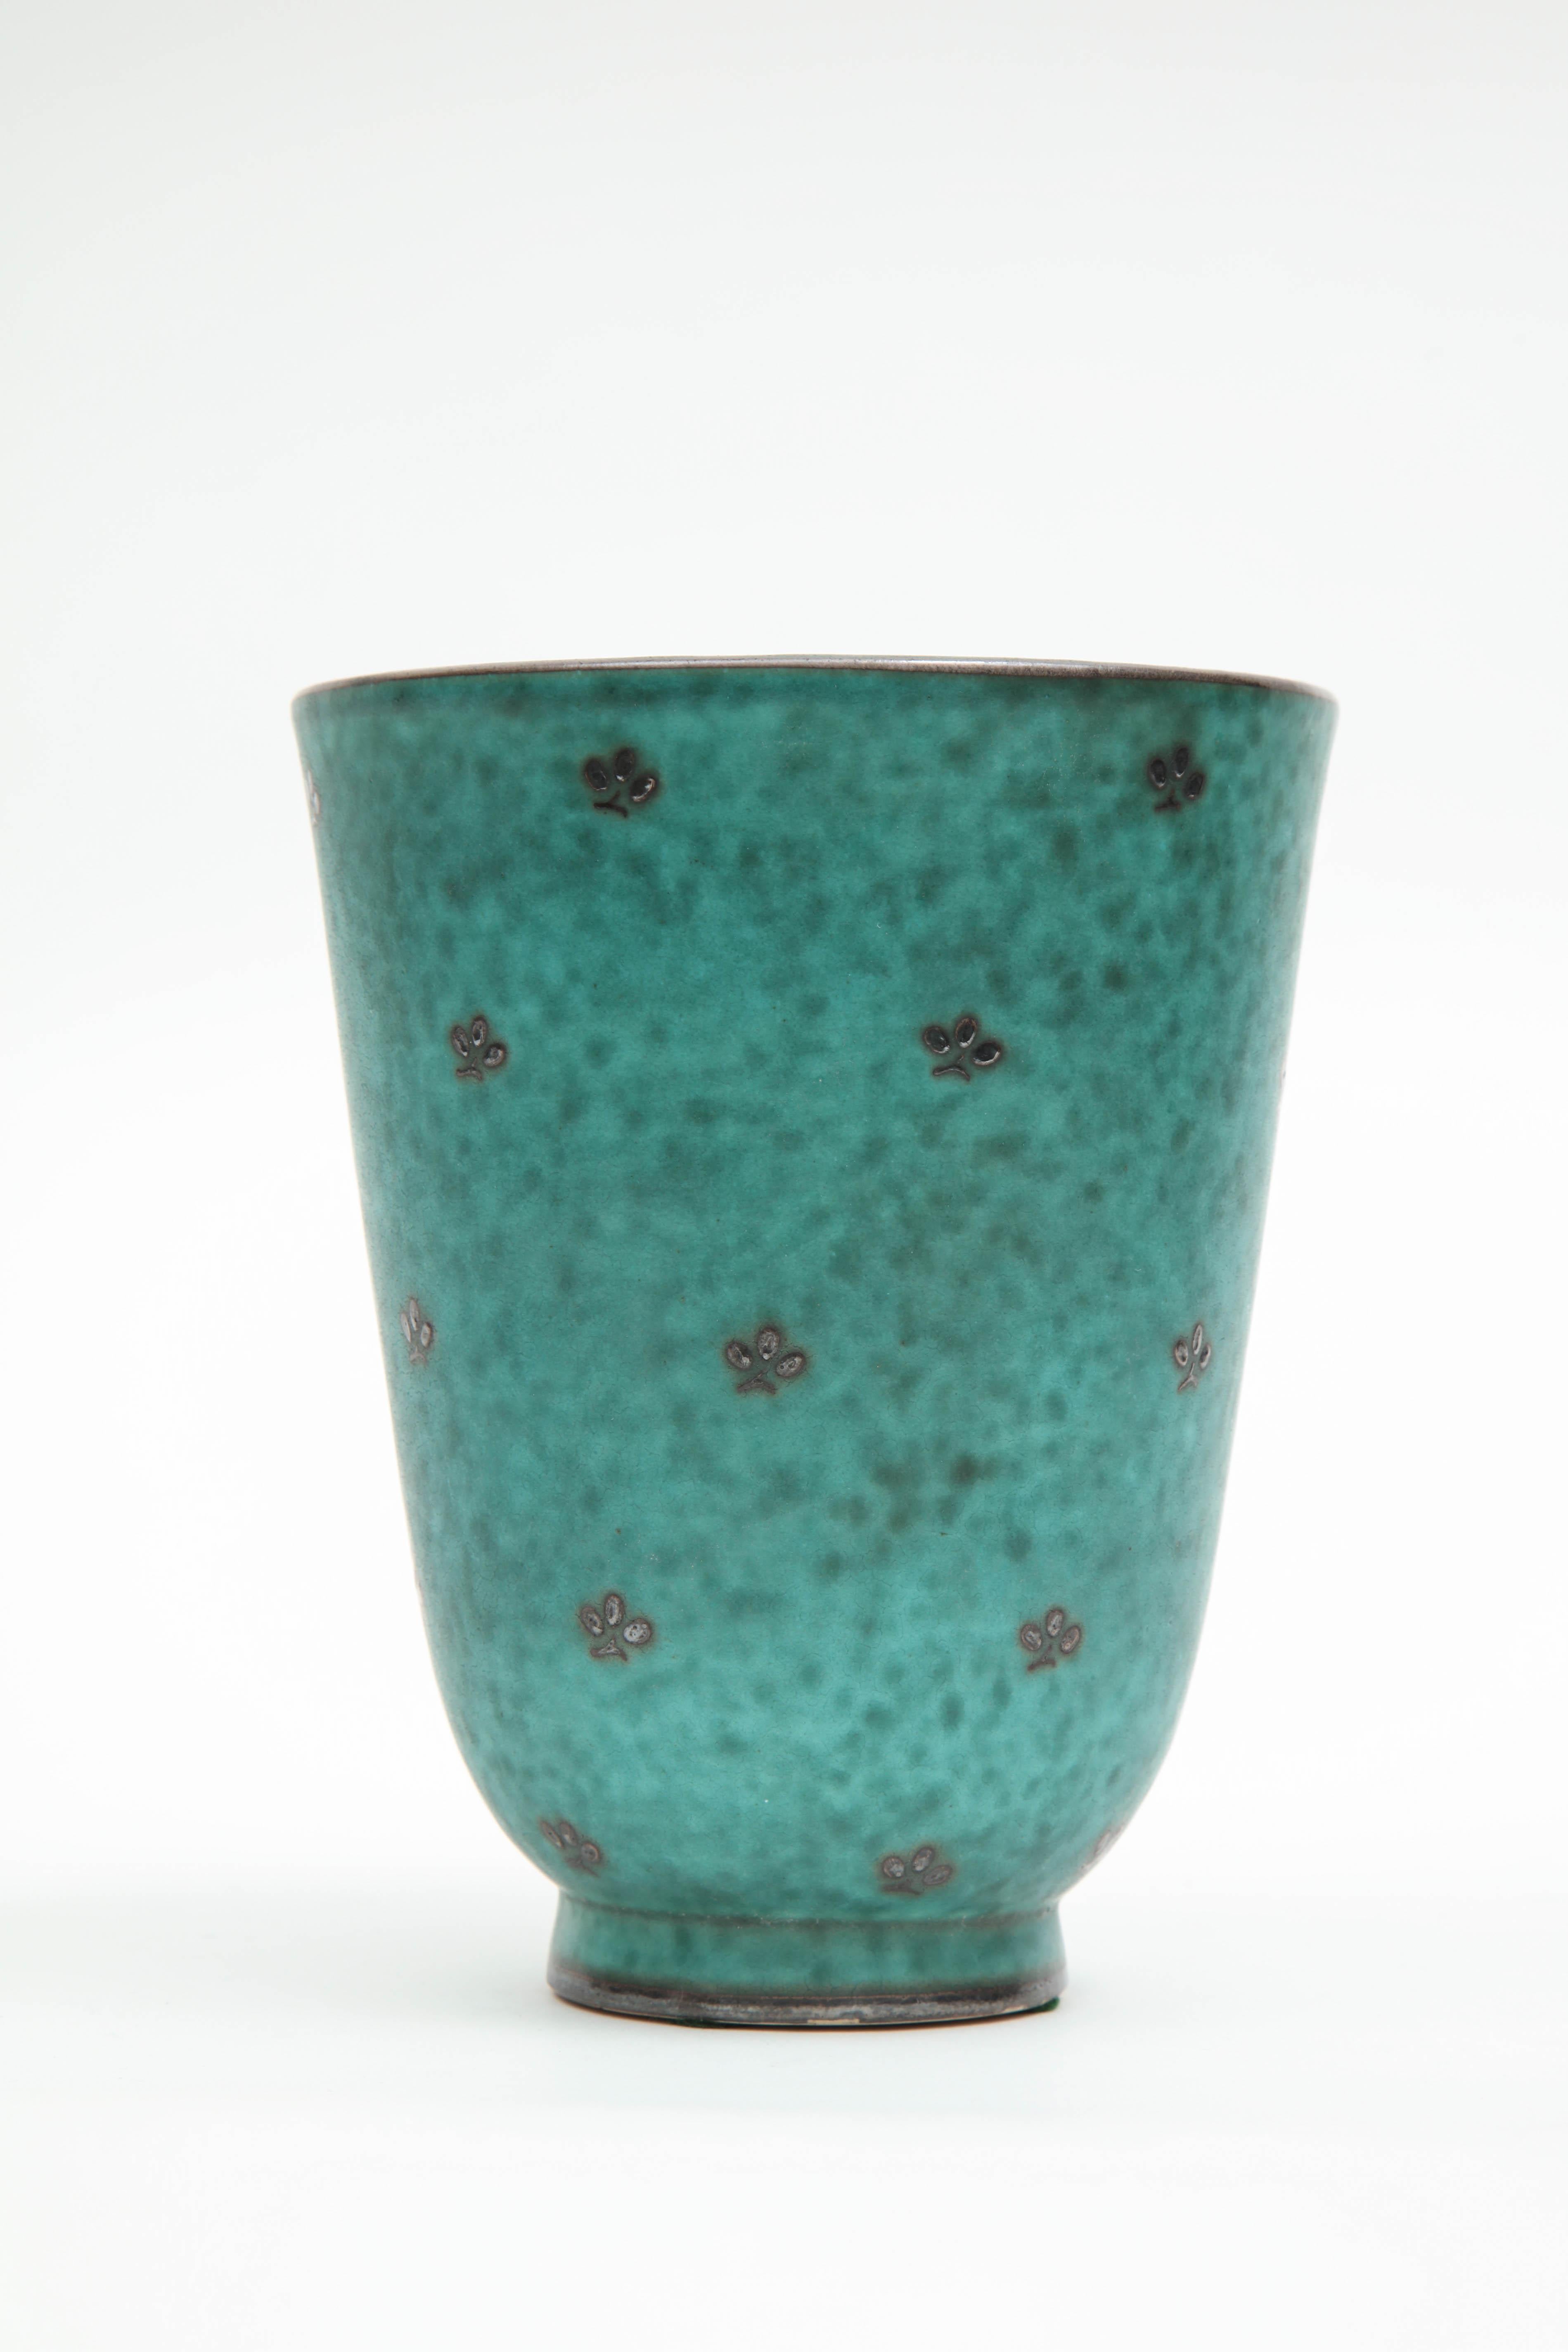 Ceramic vase by William Kage, Sweden, circa 1930. The item is from a group called Argenta because of the silver inlay.
